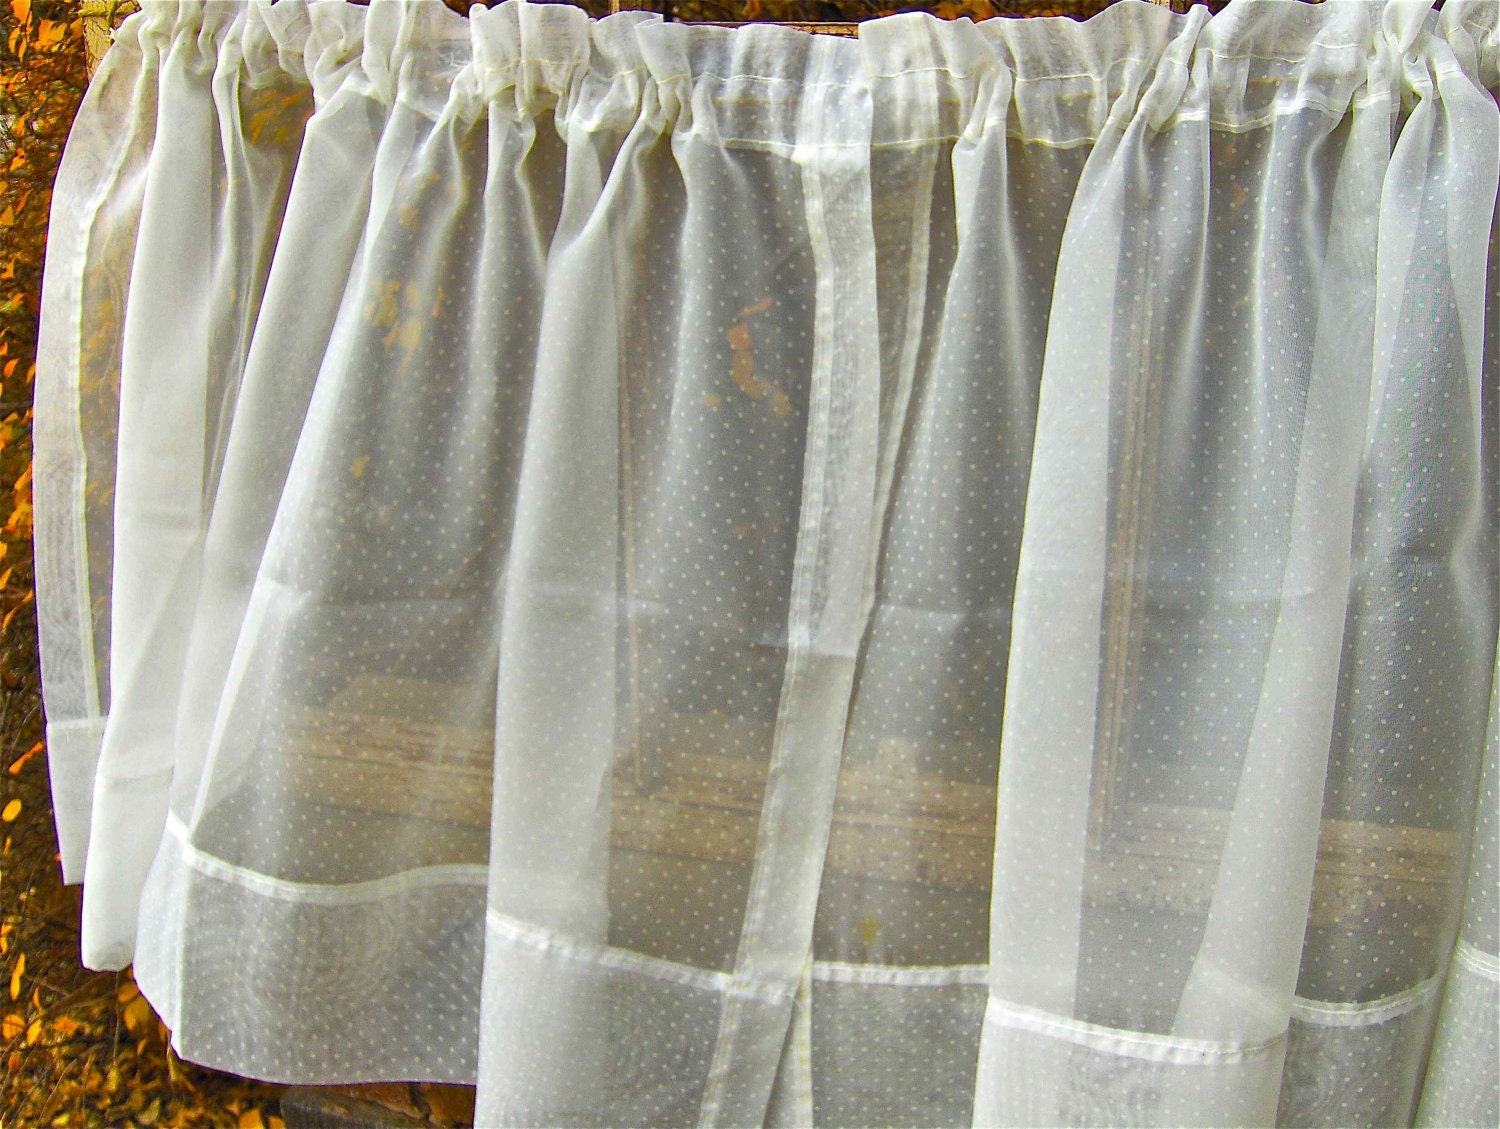 Outdoor Waterproof Curtains Patio White Patterned Sheer Curtains